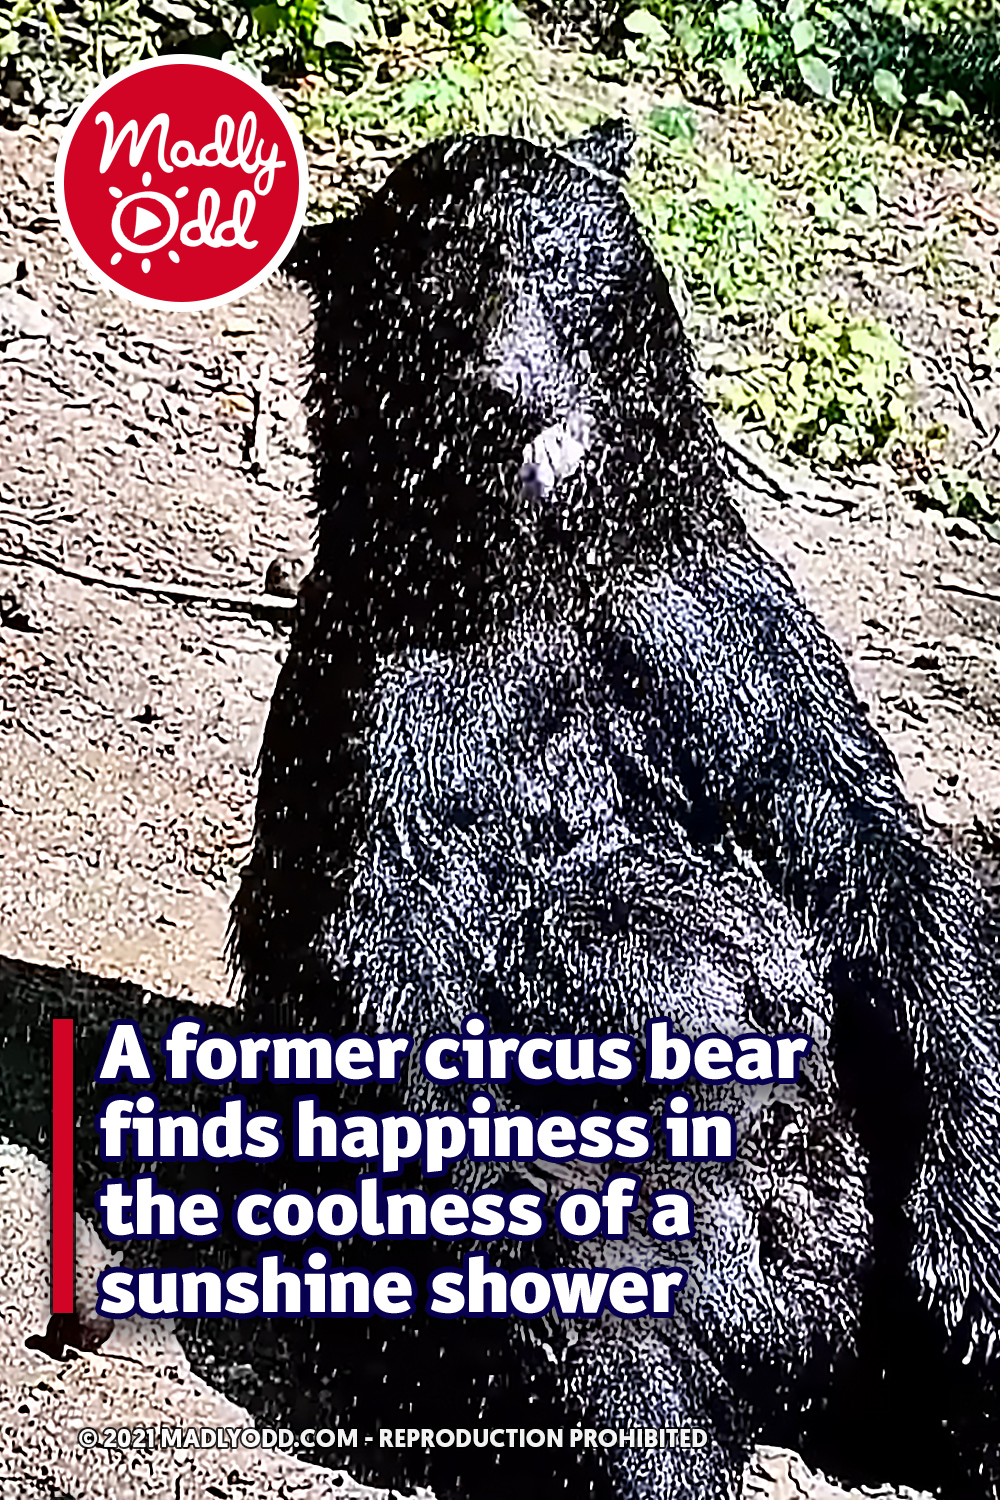 A former circus bear finds happiness in the coolness of a sunshine shower